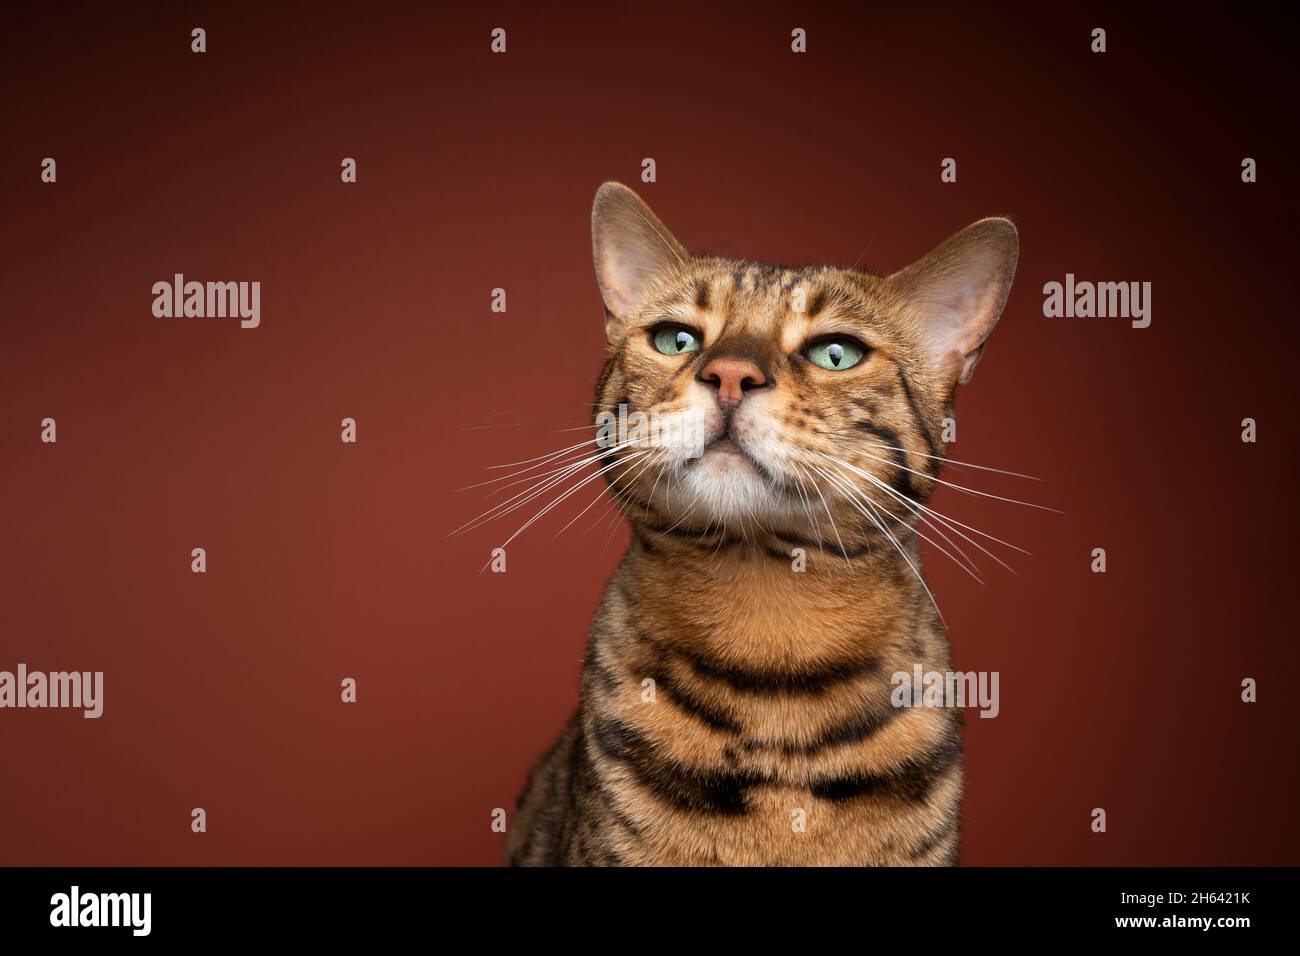 curious bengal cat with brown fur and green eyes portrait on brown background with copy space Stock Photo